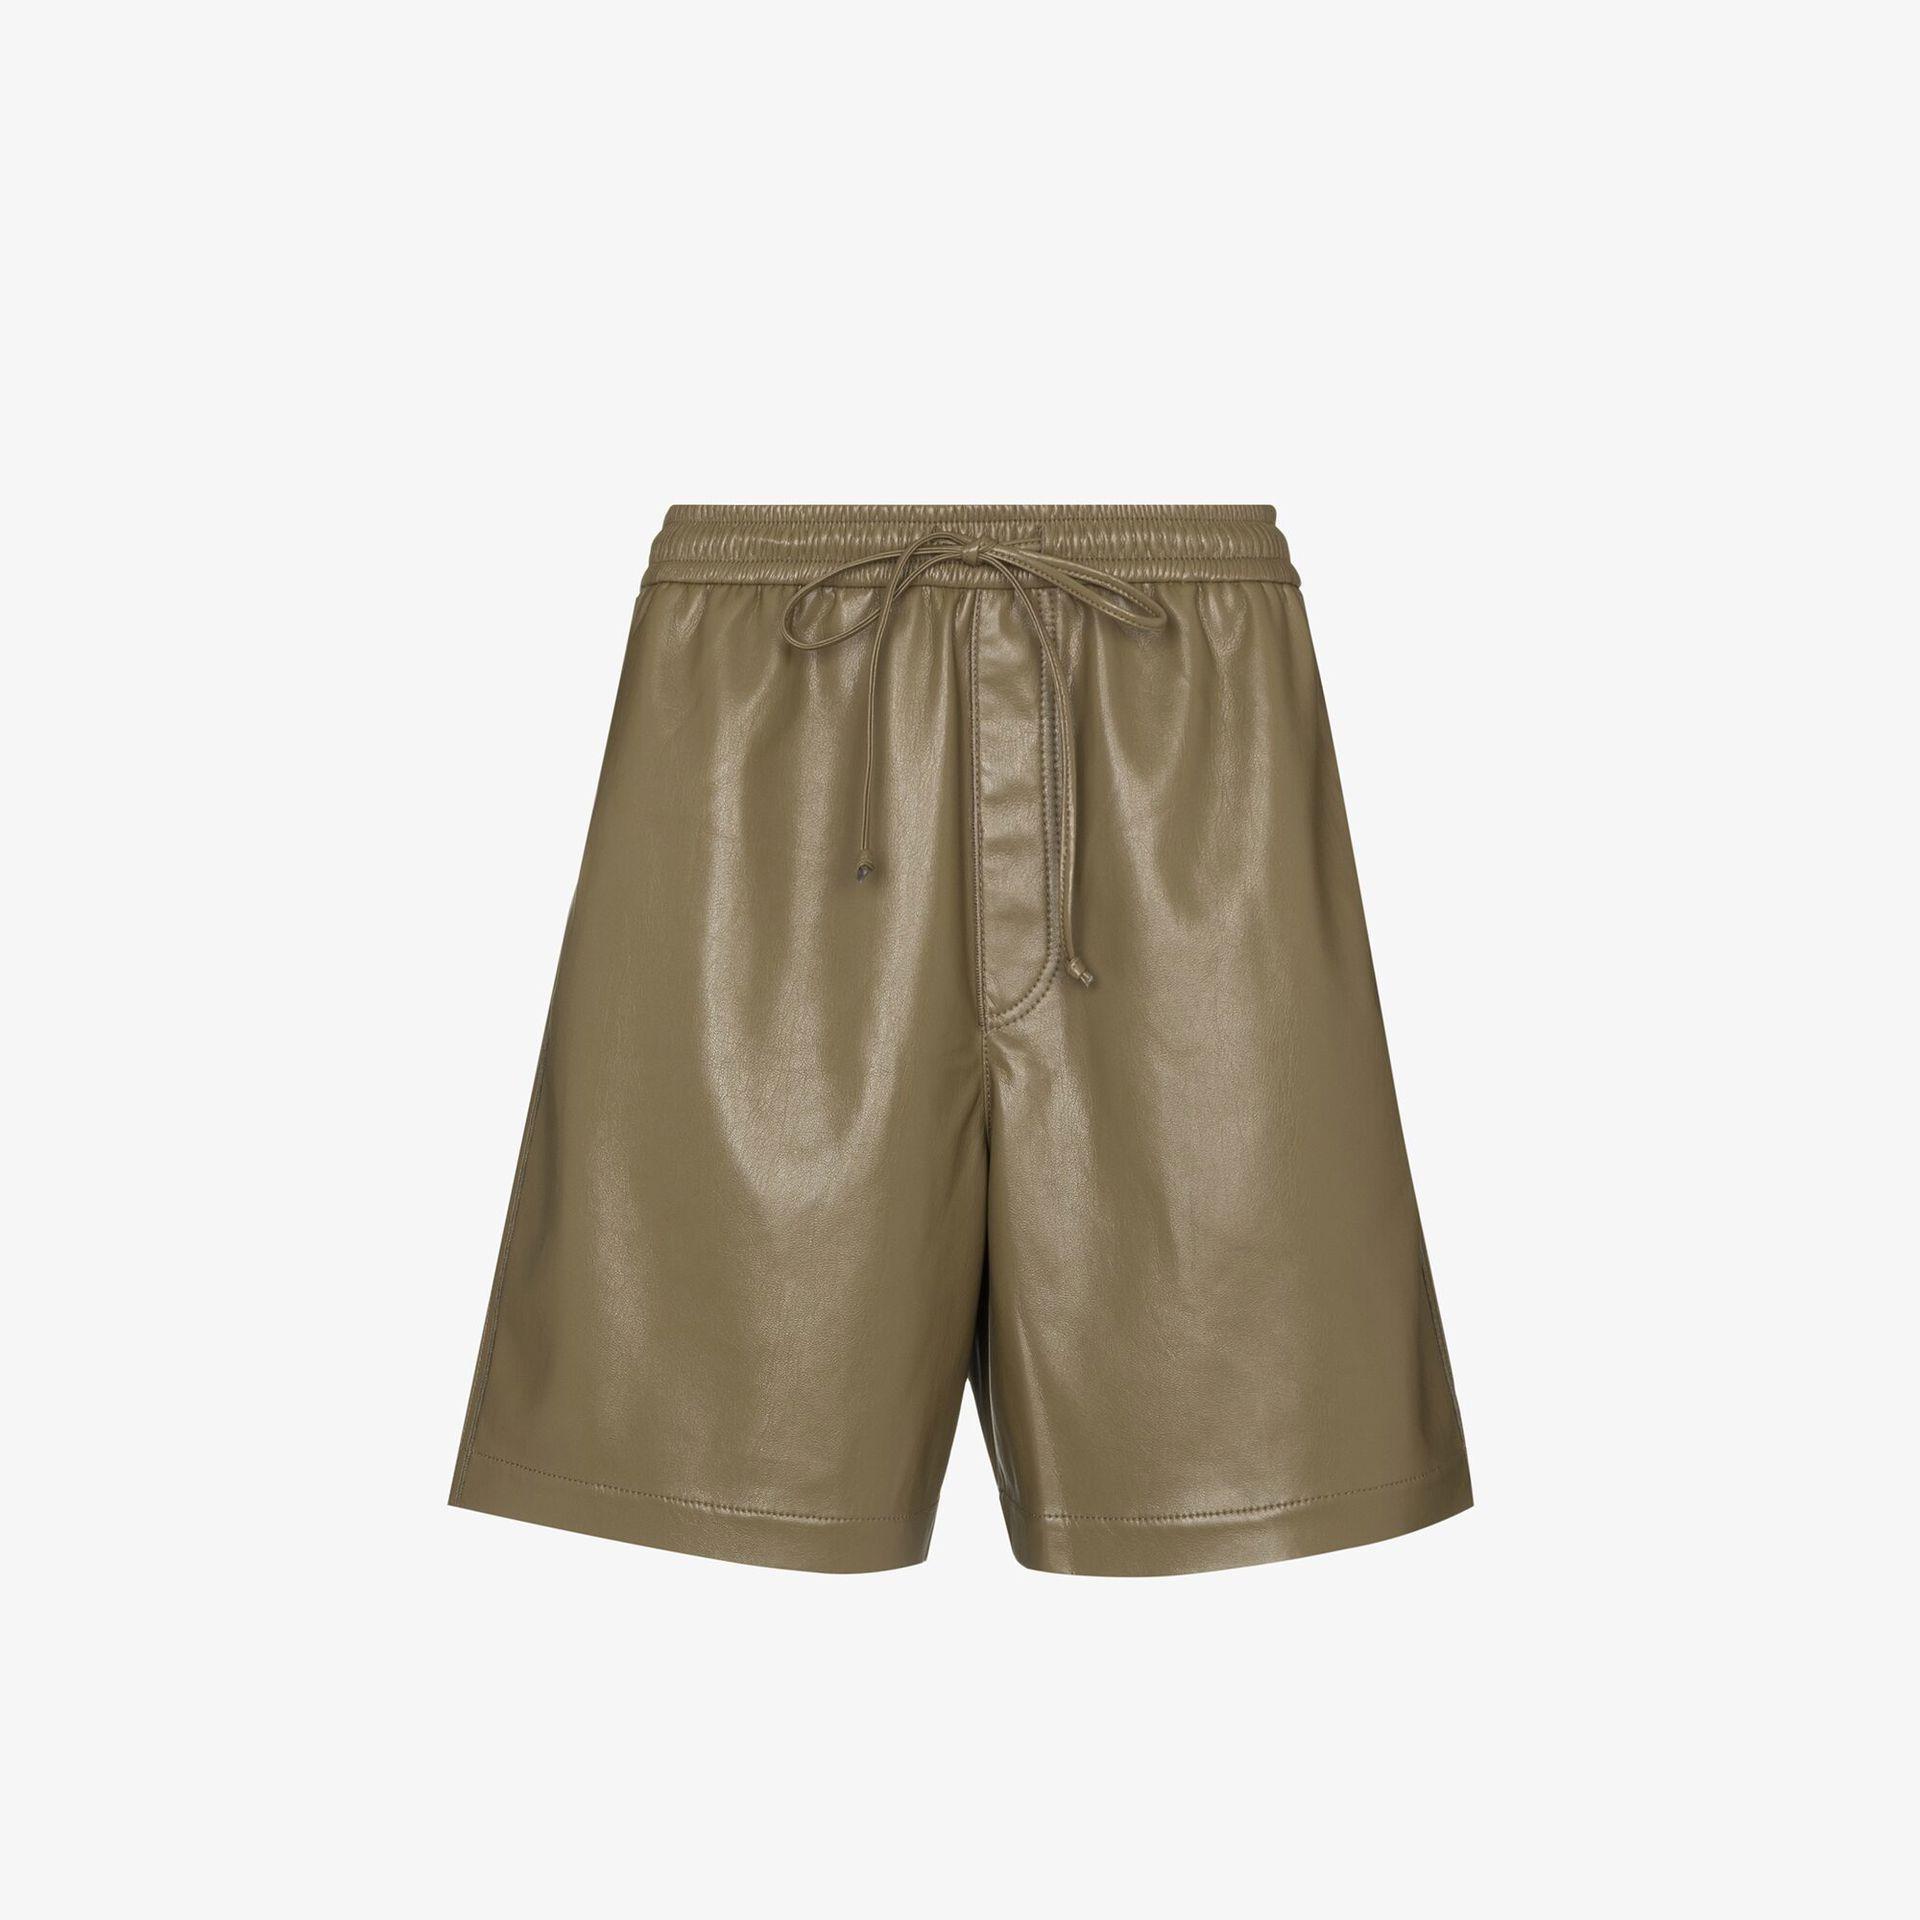 Leather Shorts with Elastic Band Napa Leather Sport Style Green and Black 